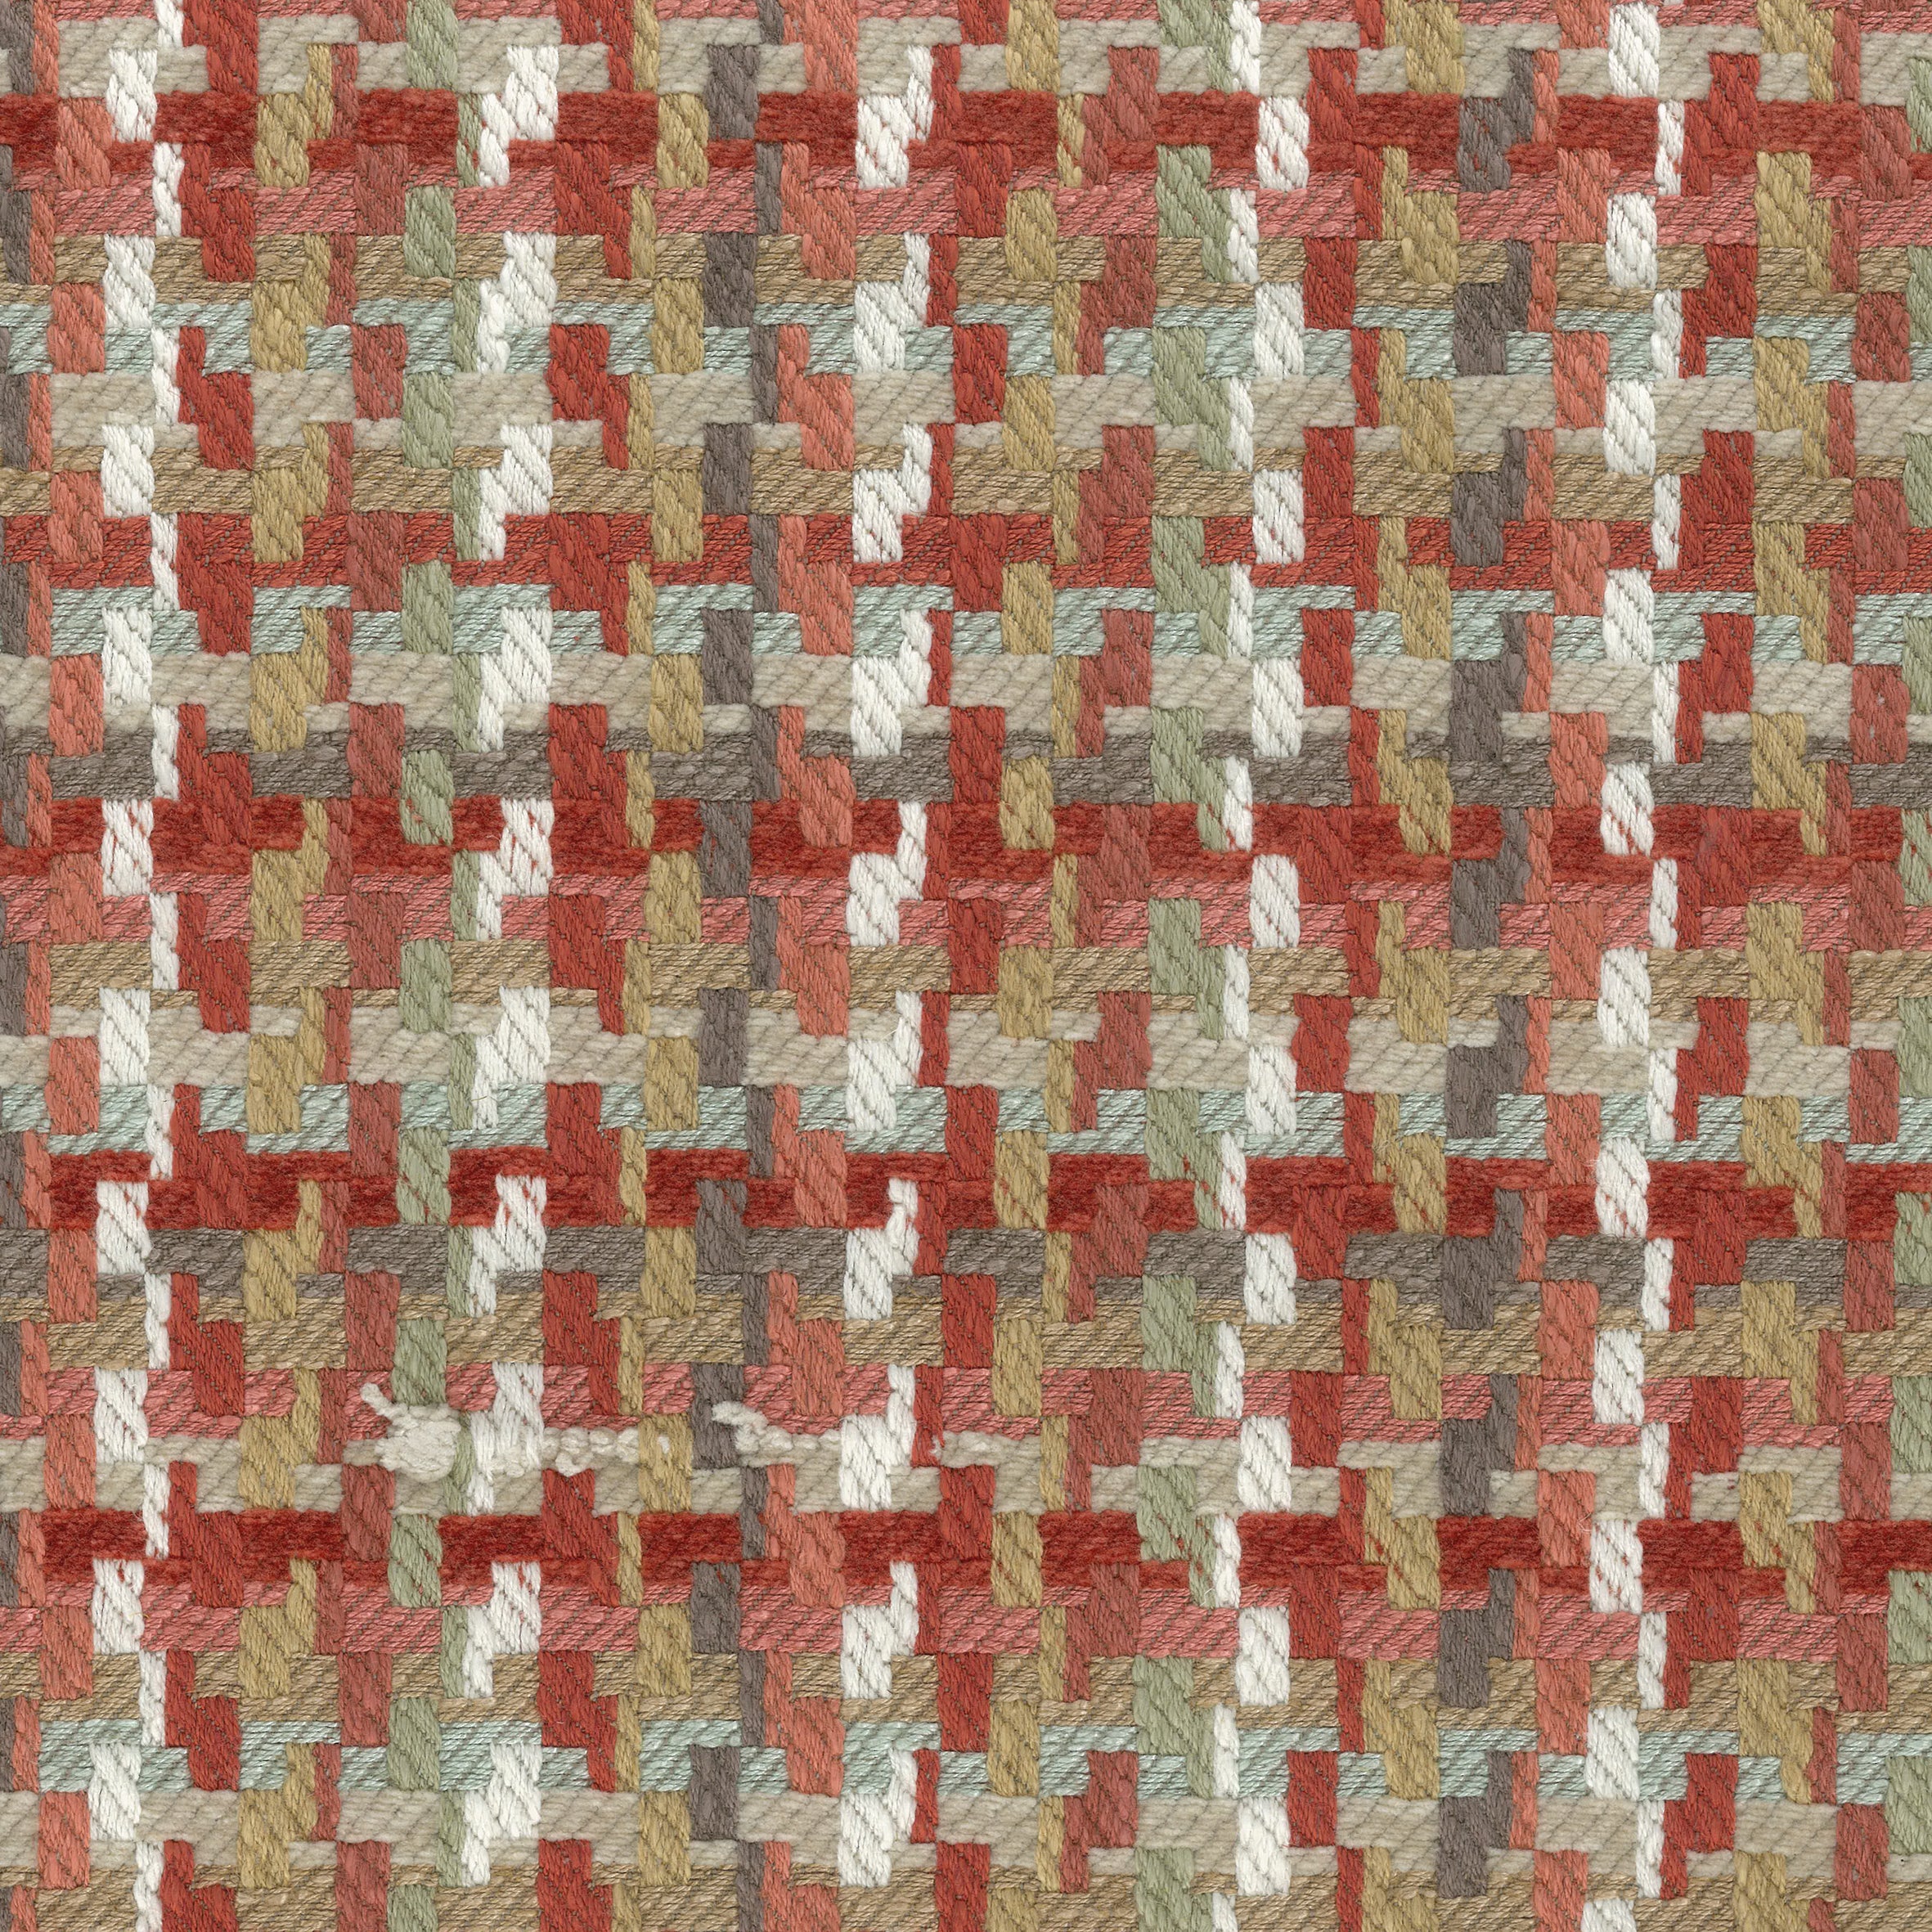 Nina Campbell Fabric - Dallimore Weaves Hadlow Coral/Taupe/Duck Egg NCF4521-02